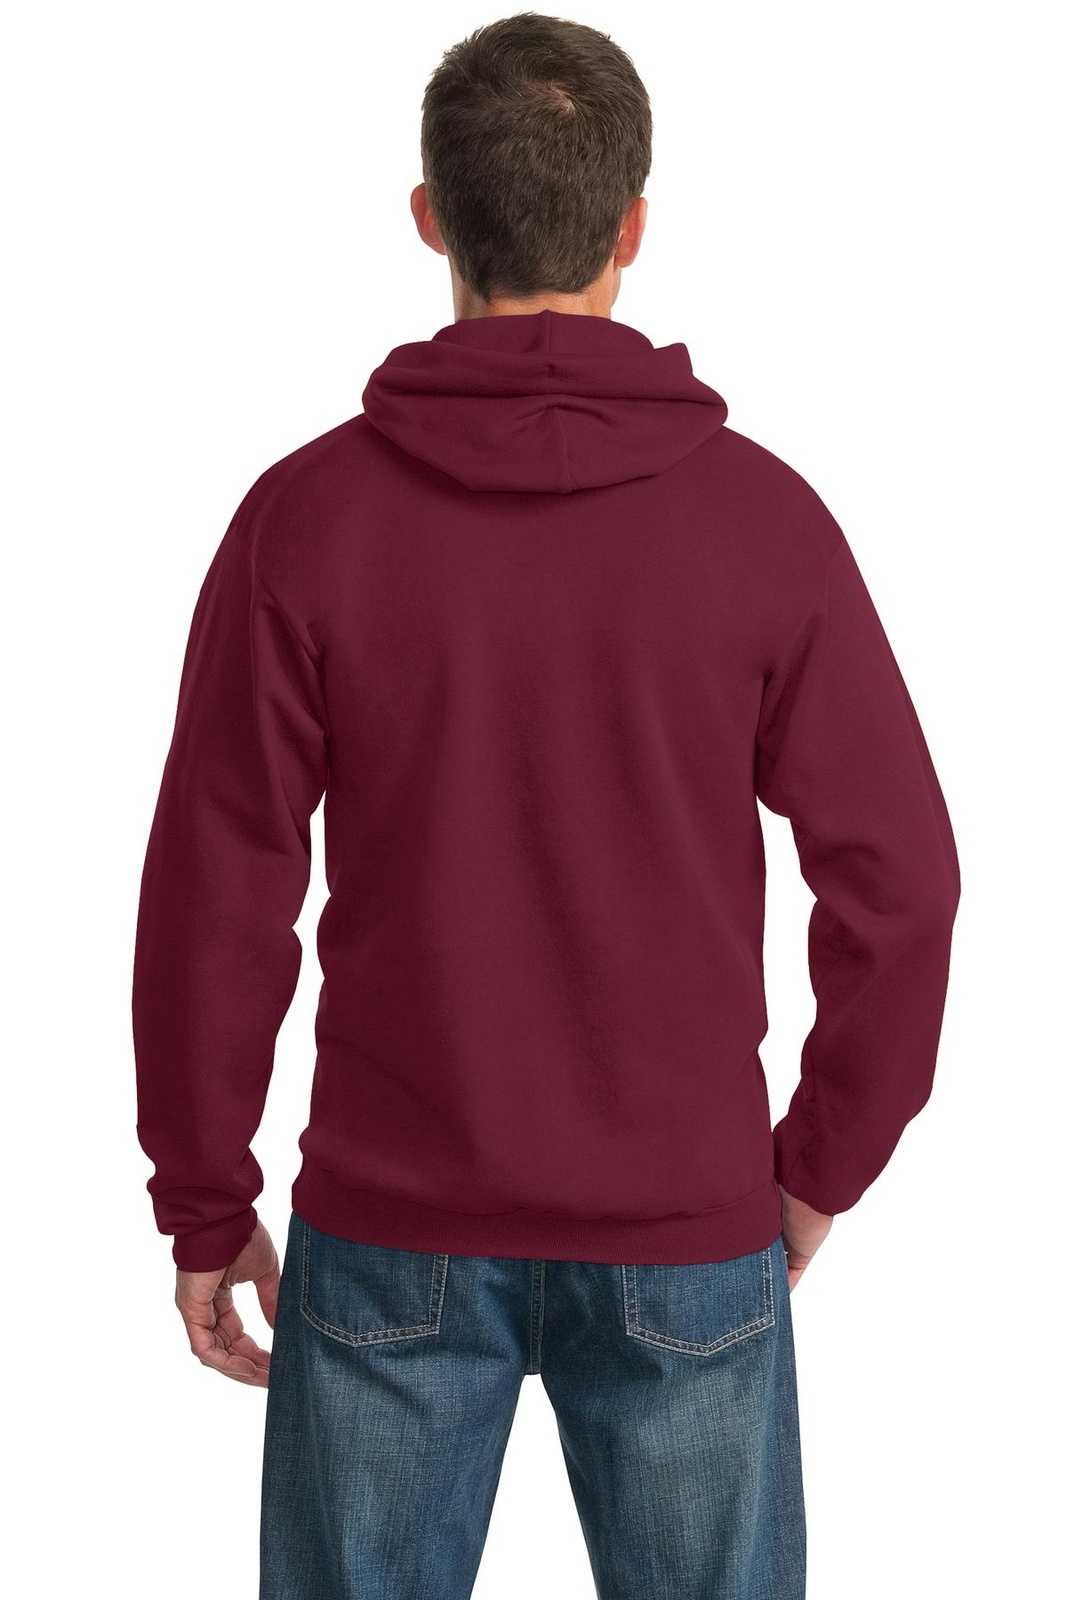 Port & Company PC90H Essential Fleece Pullover Hooded Sweatshirt - Cardinal - HIT a Double - 1